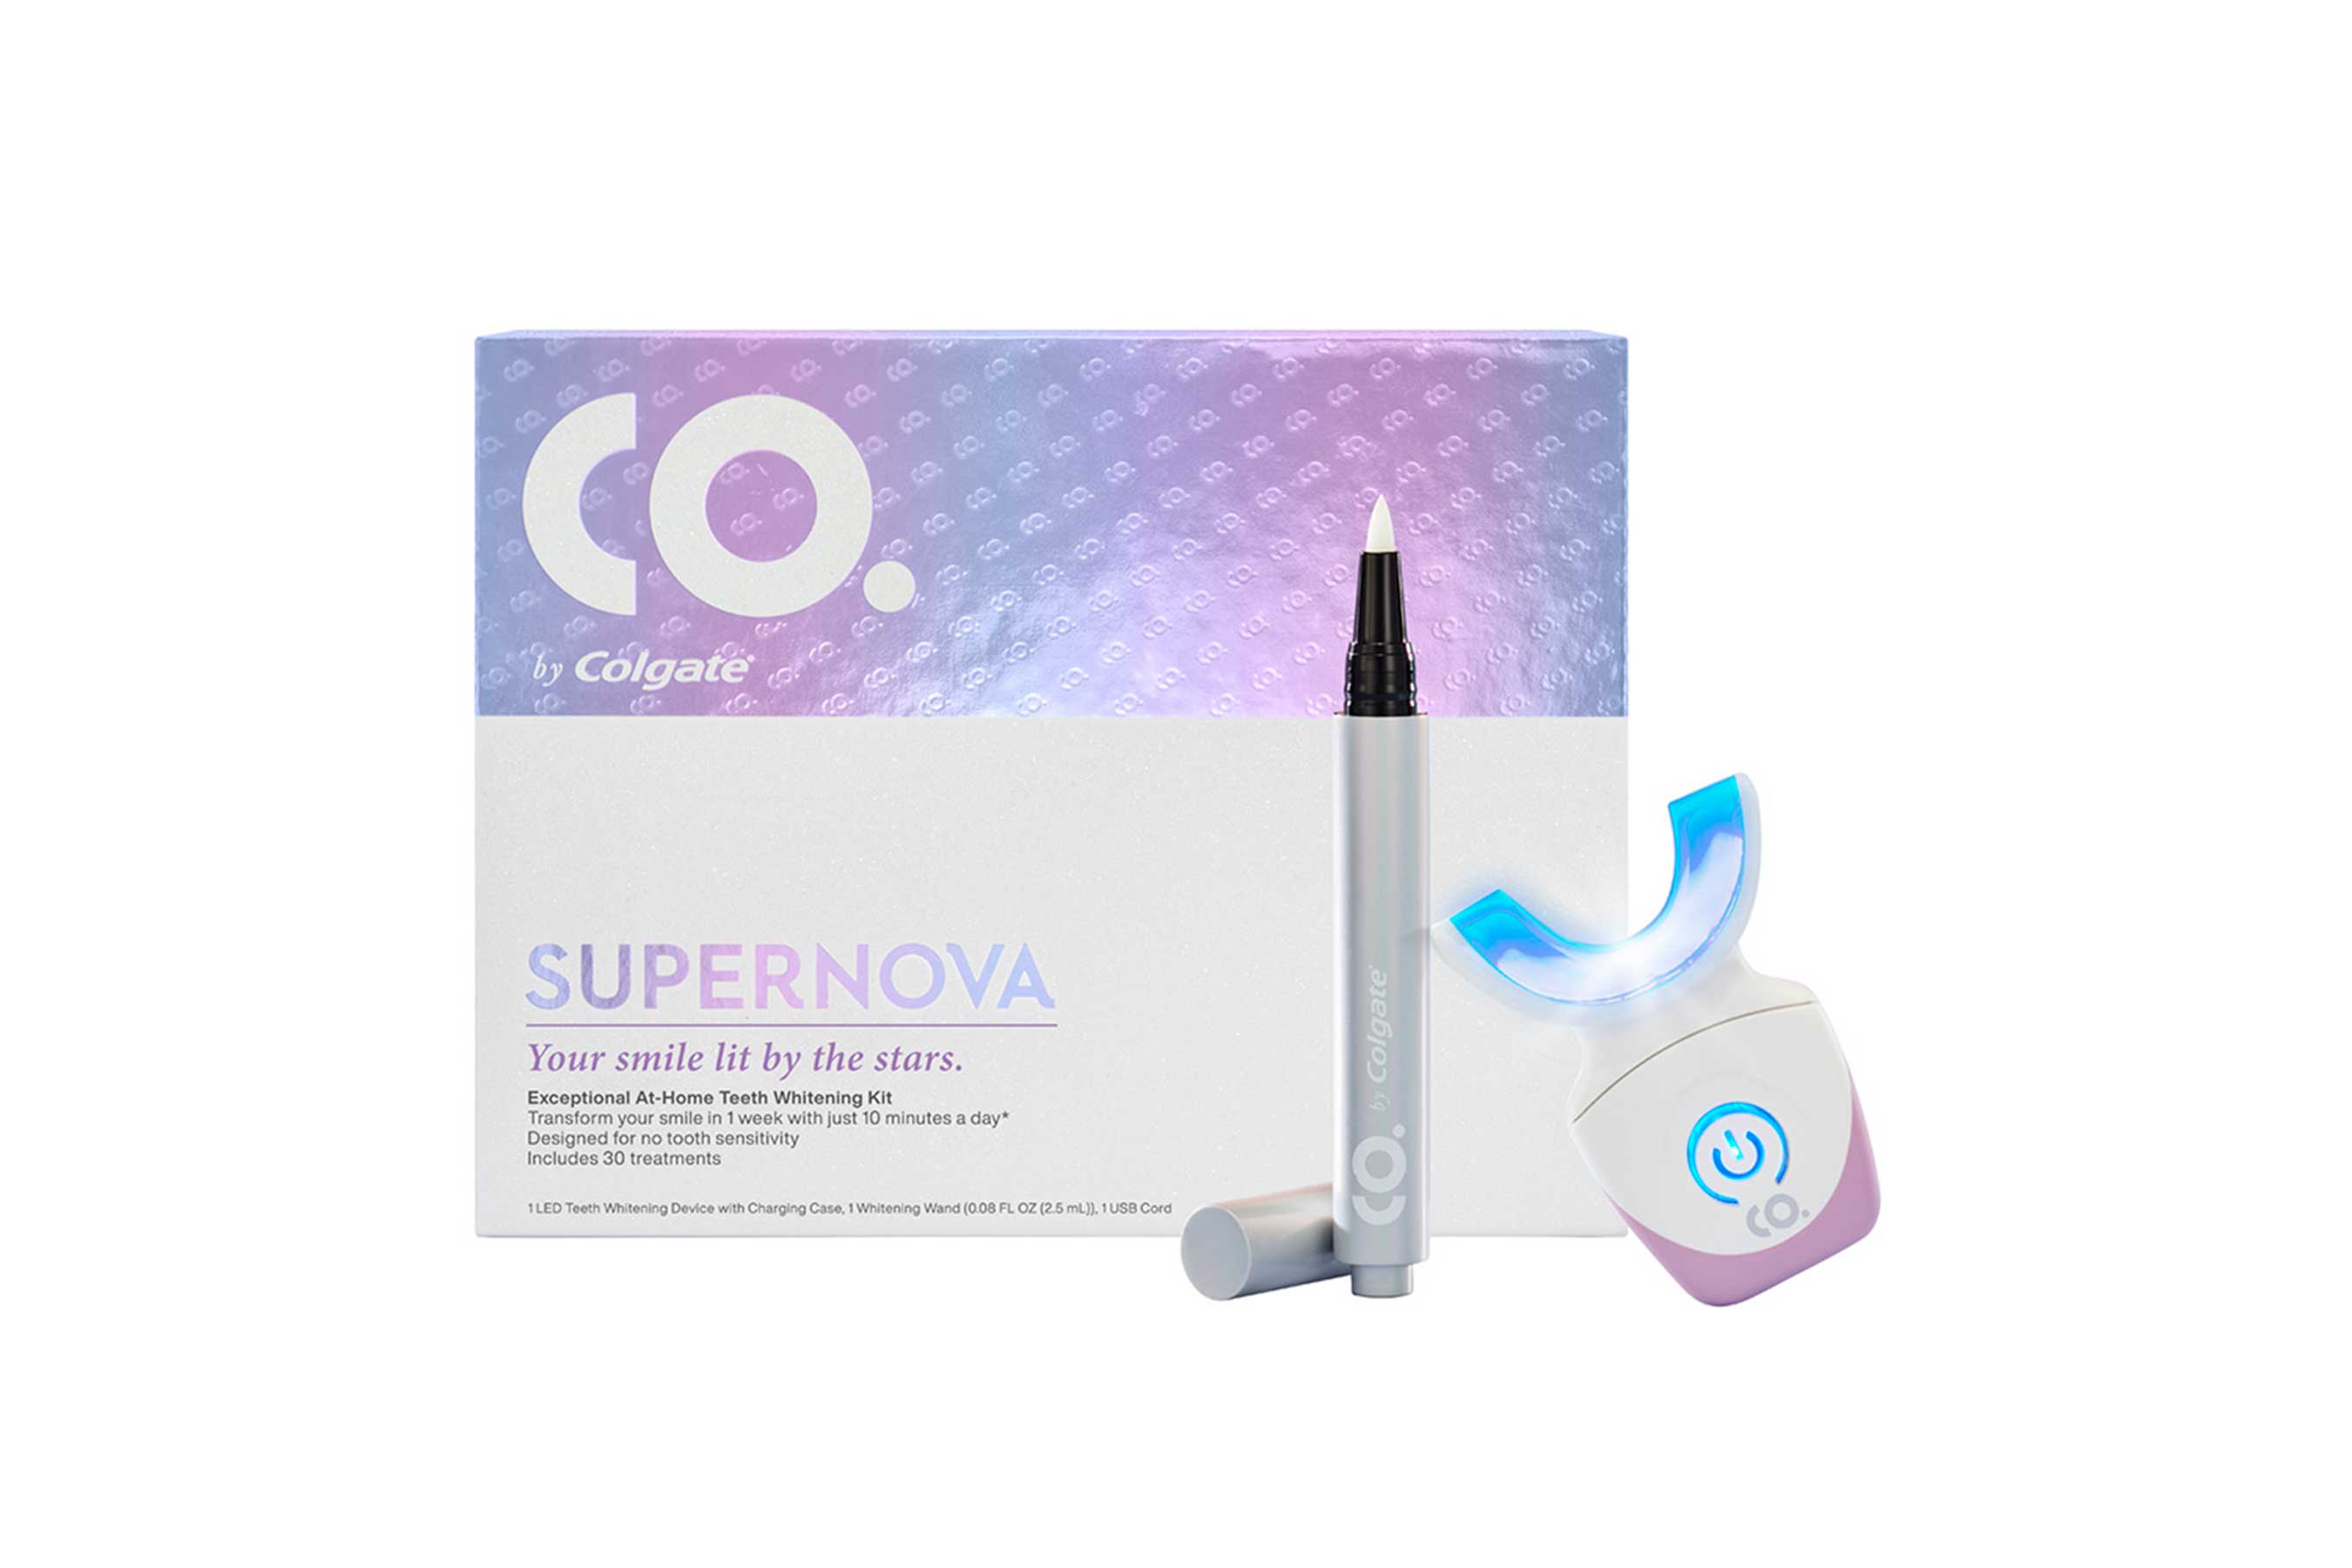 SuperNova-group toothpaste package